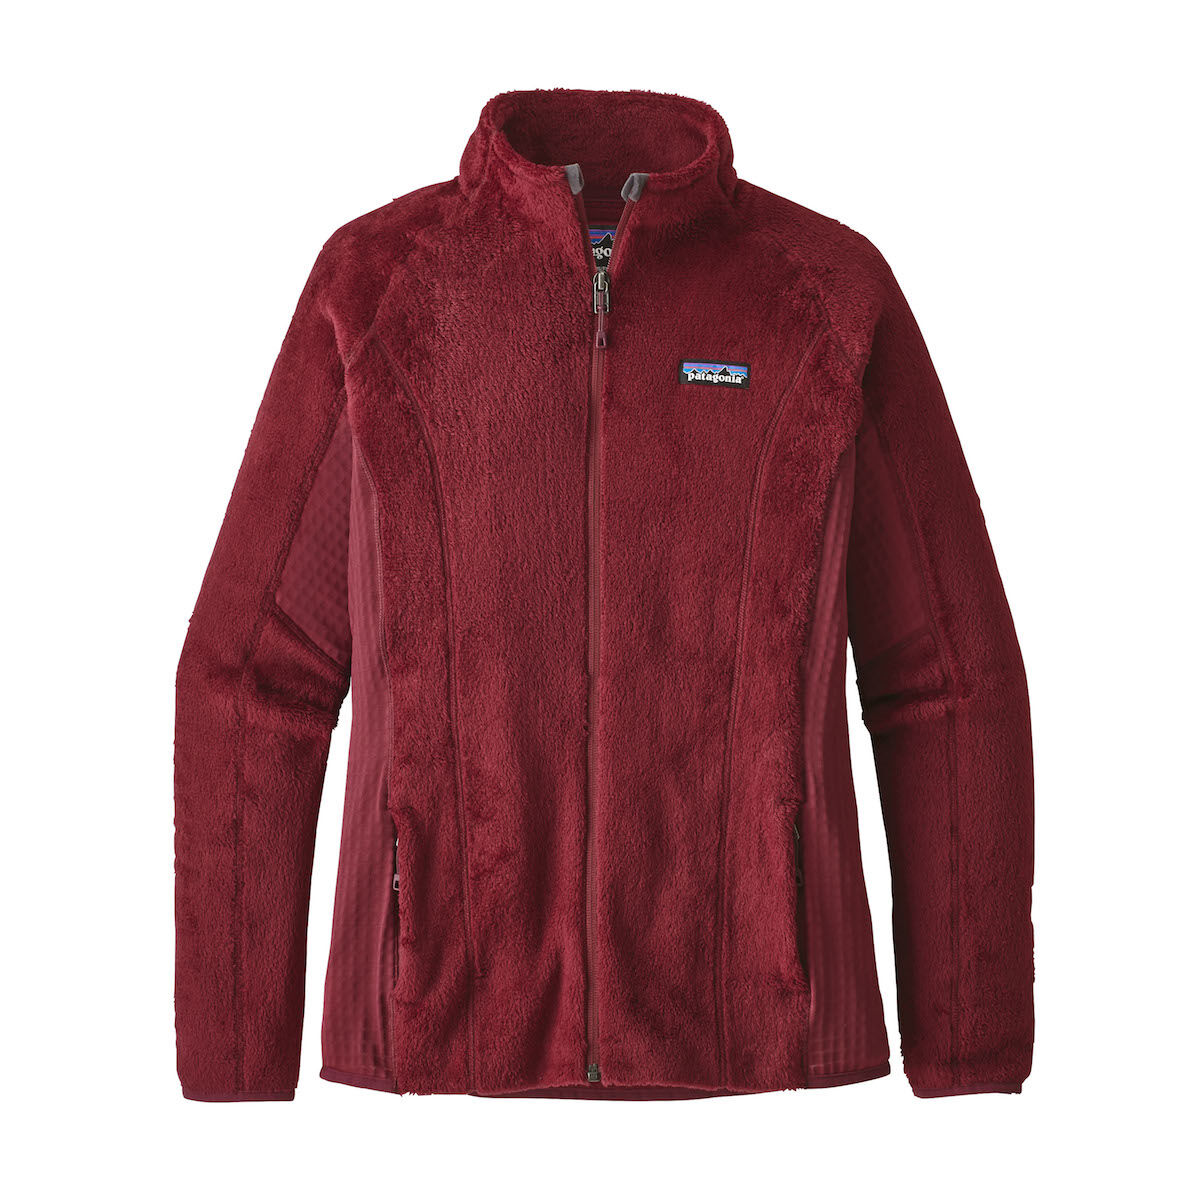 Patagonia - R2 Jacket - Giacca in pile - Donna